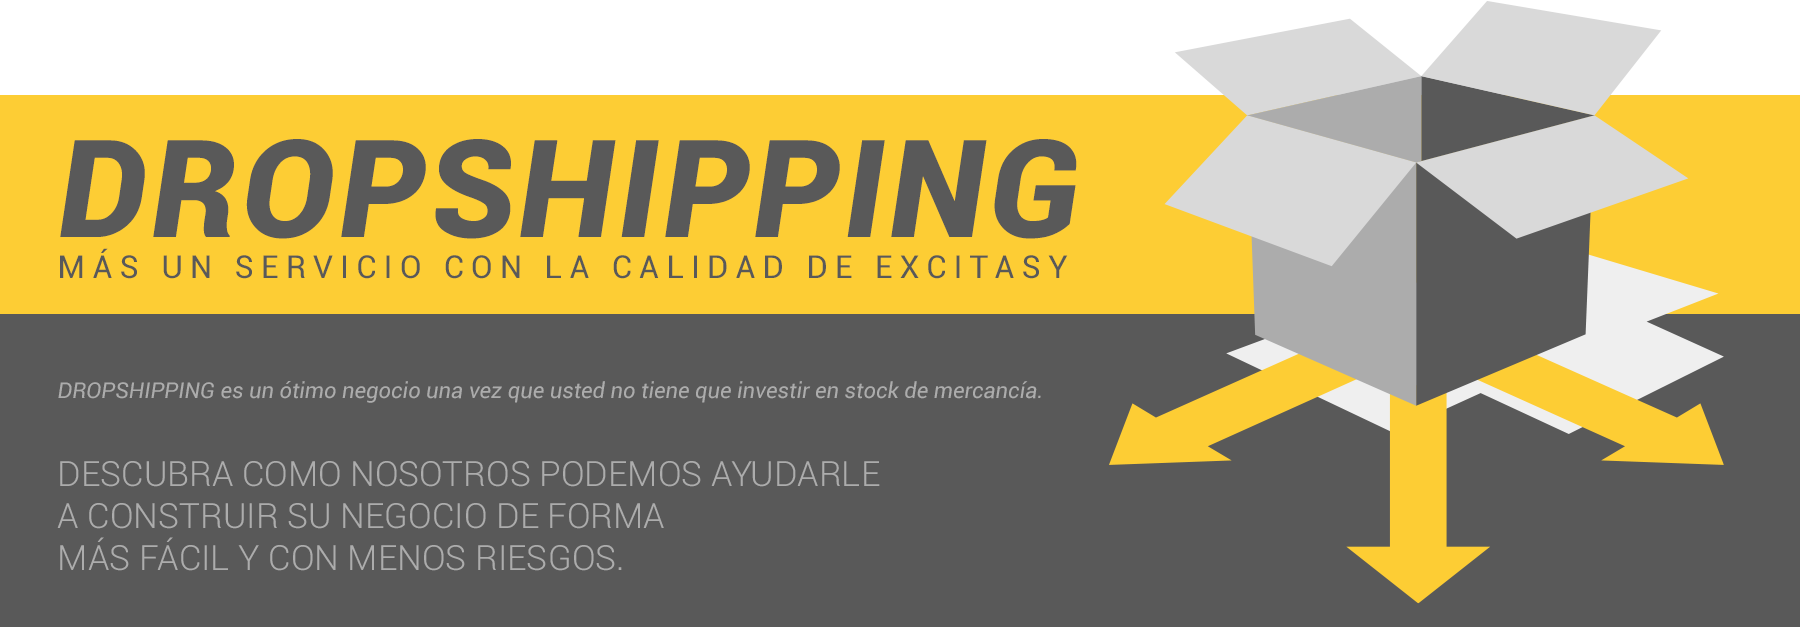 dropshipping by excitasy